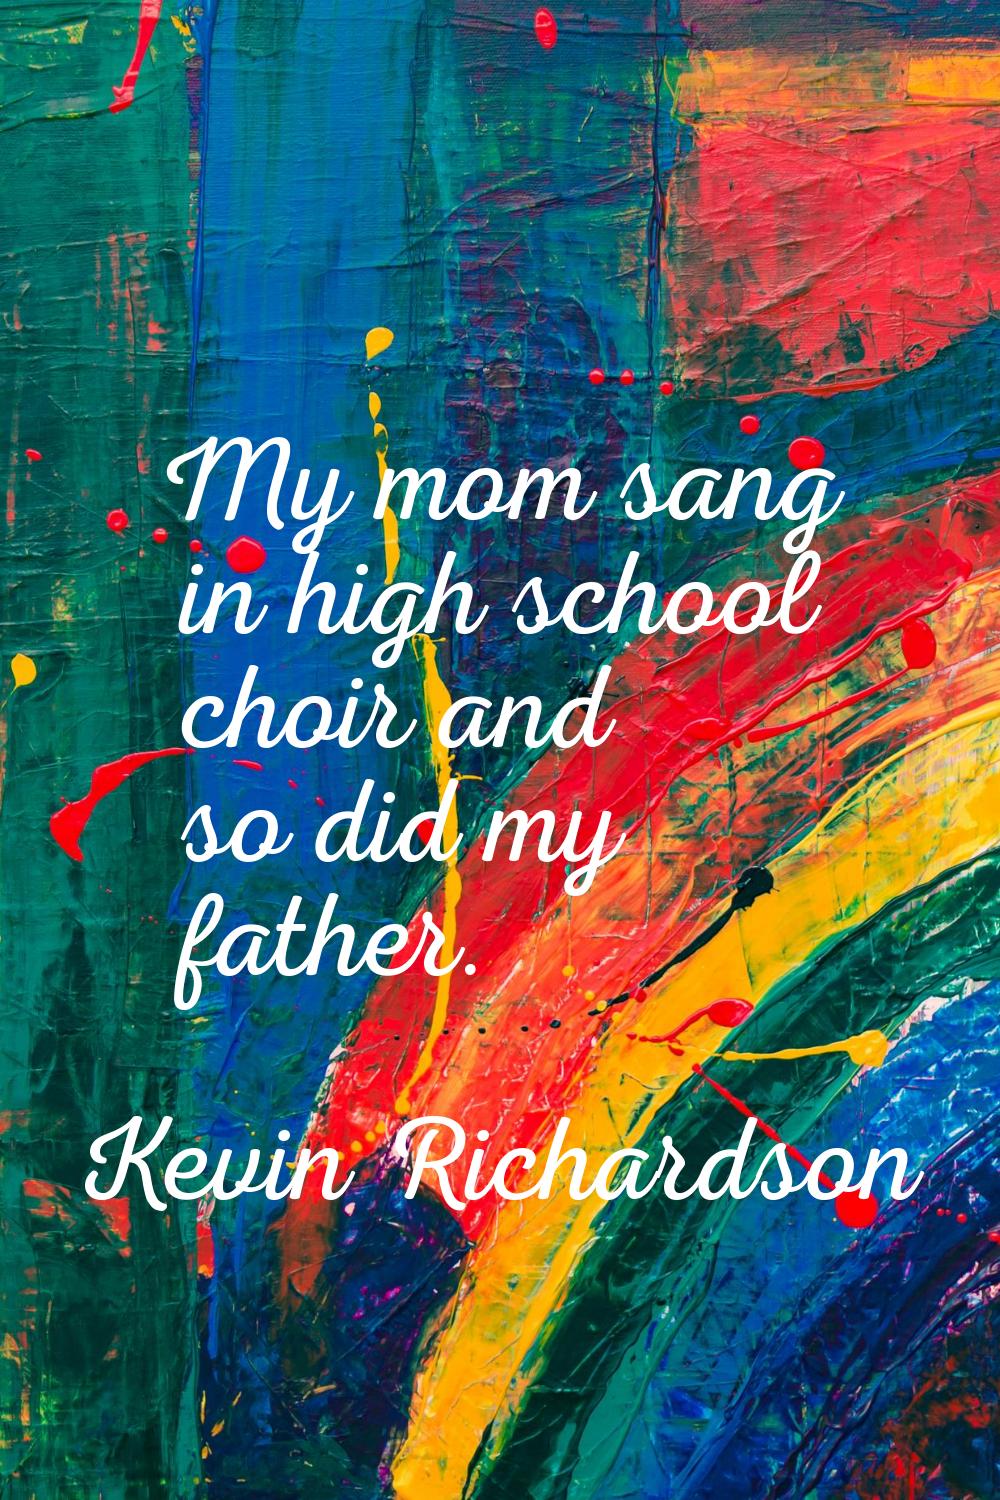 My mom sang in high school choir and so did my father.